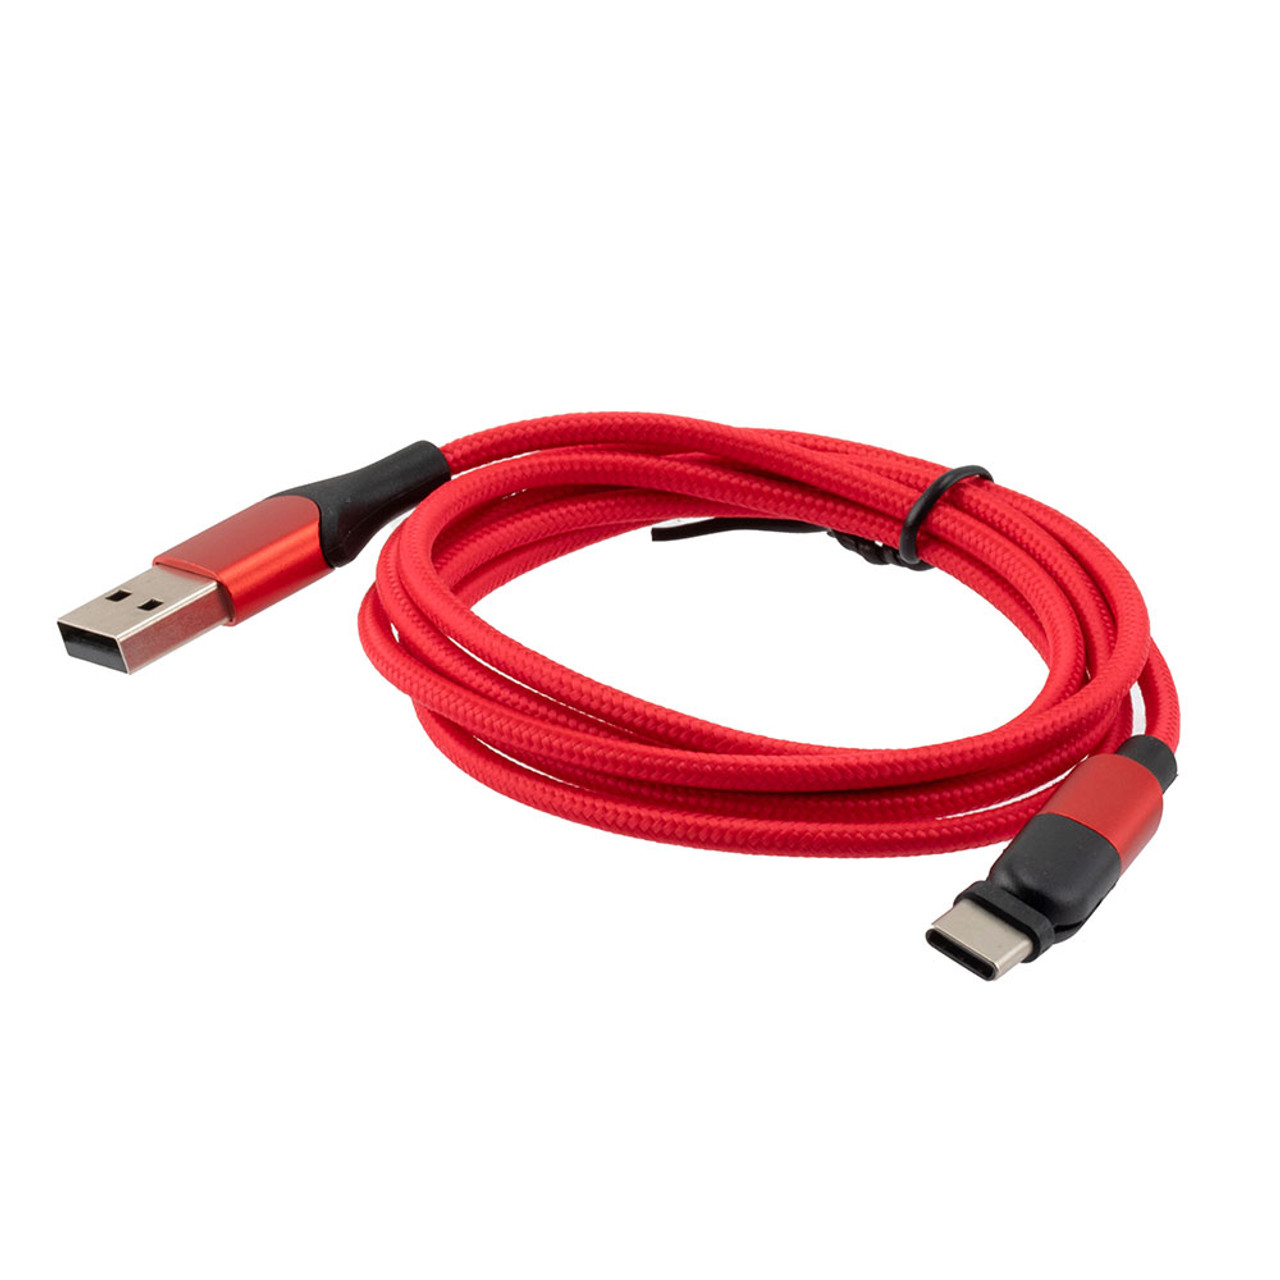 NavePoint USB 2.0 180-degree Rotating Head PVC Nylon Braided Cable, Red, USB A Male to USB C Micro Male, 2 Meter 